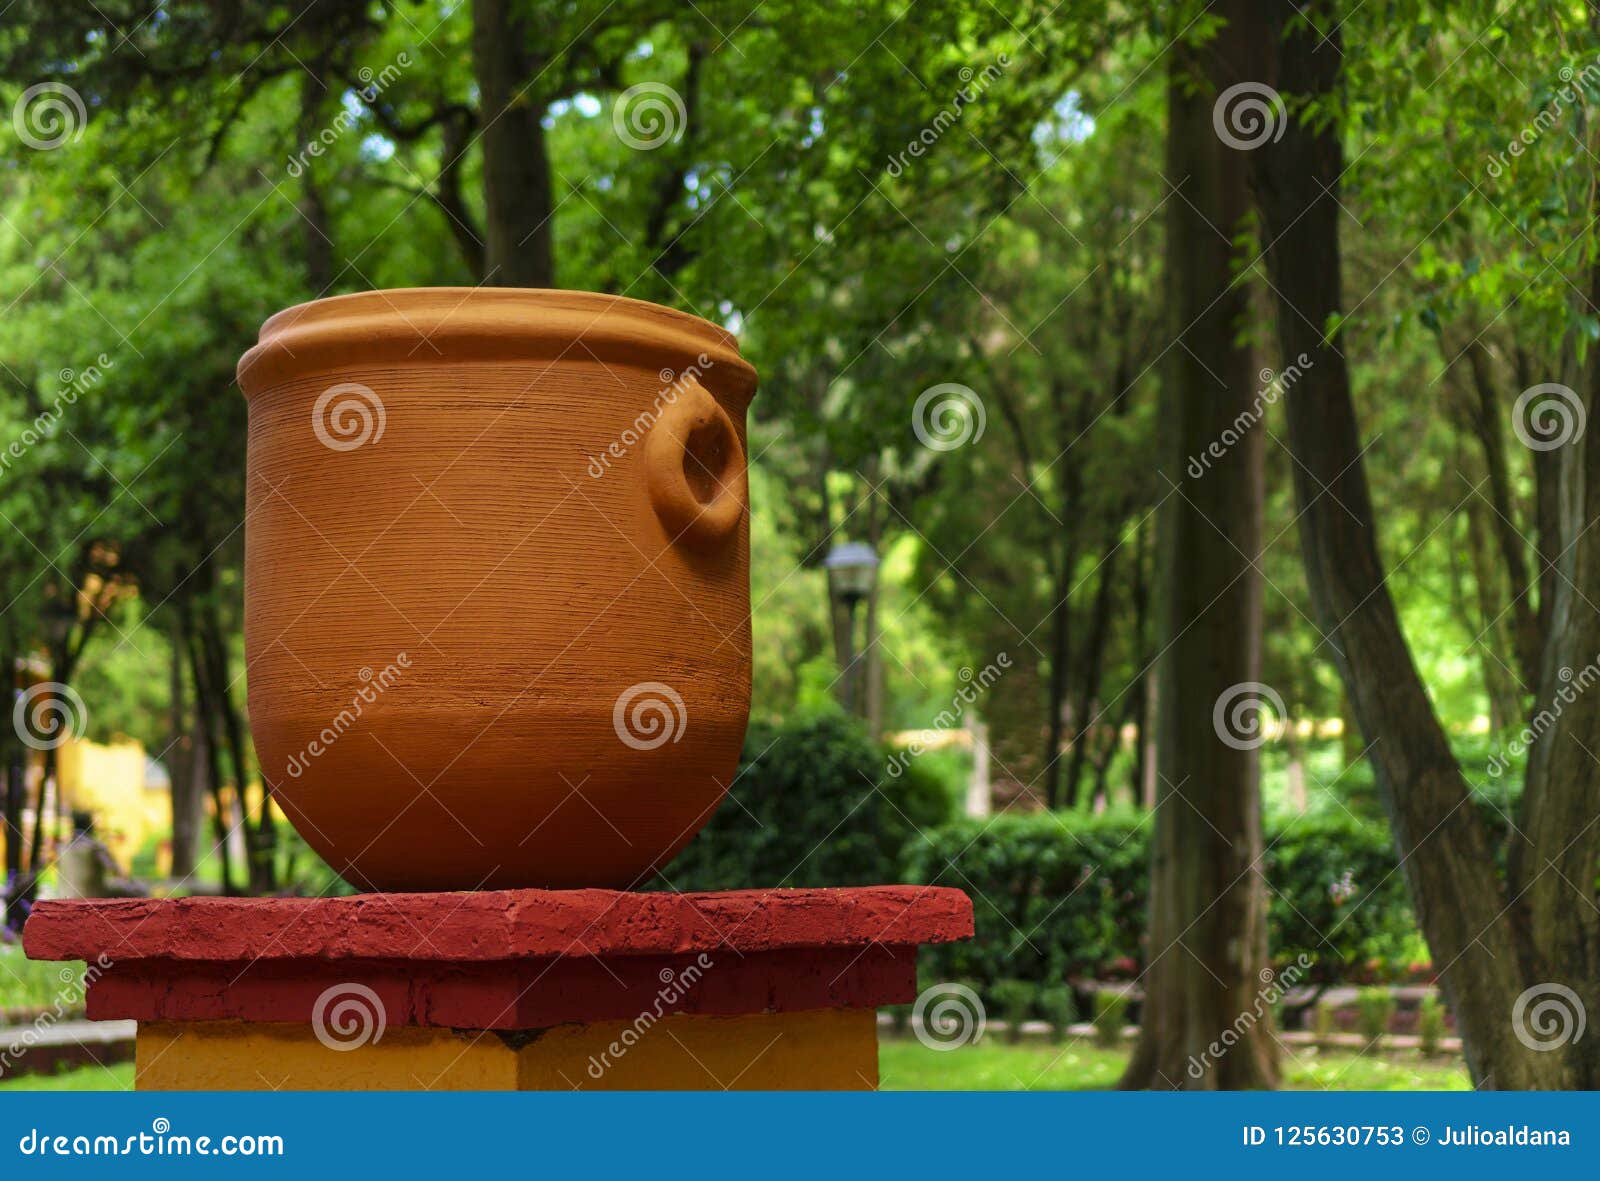 big clay pitcher pot and mexican garden